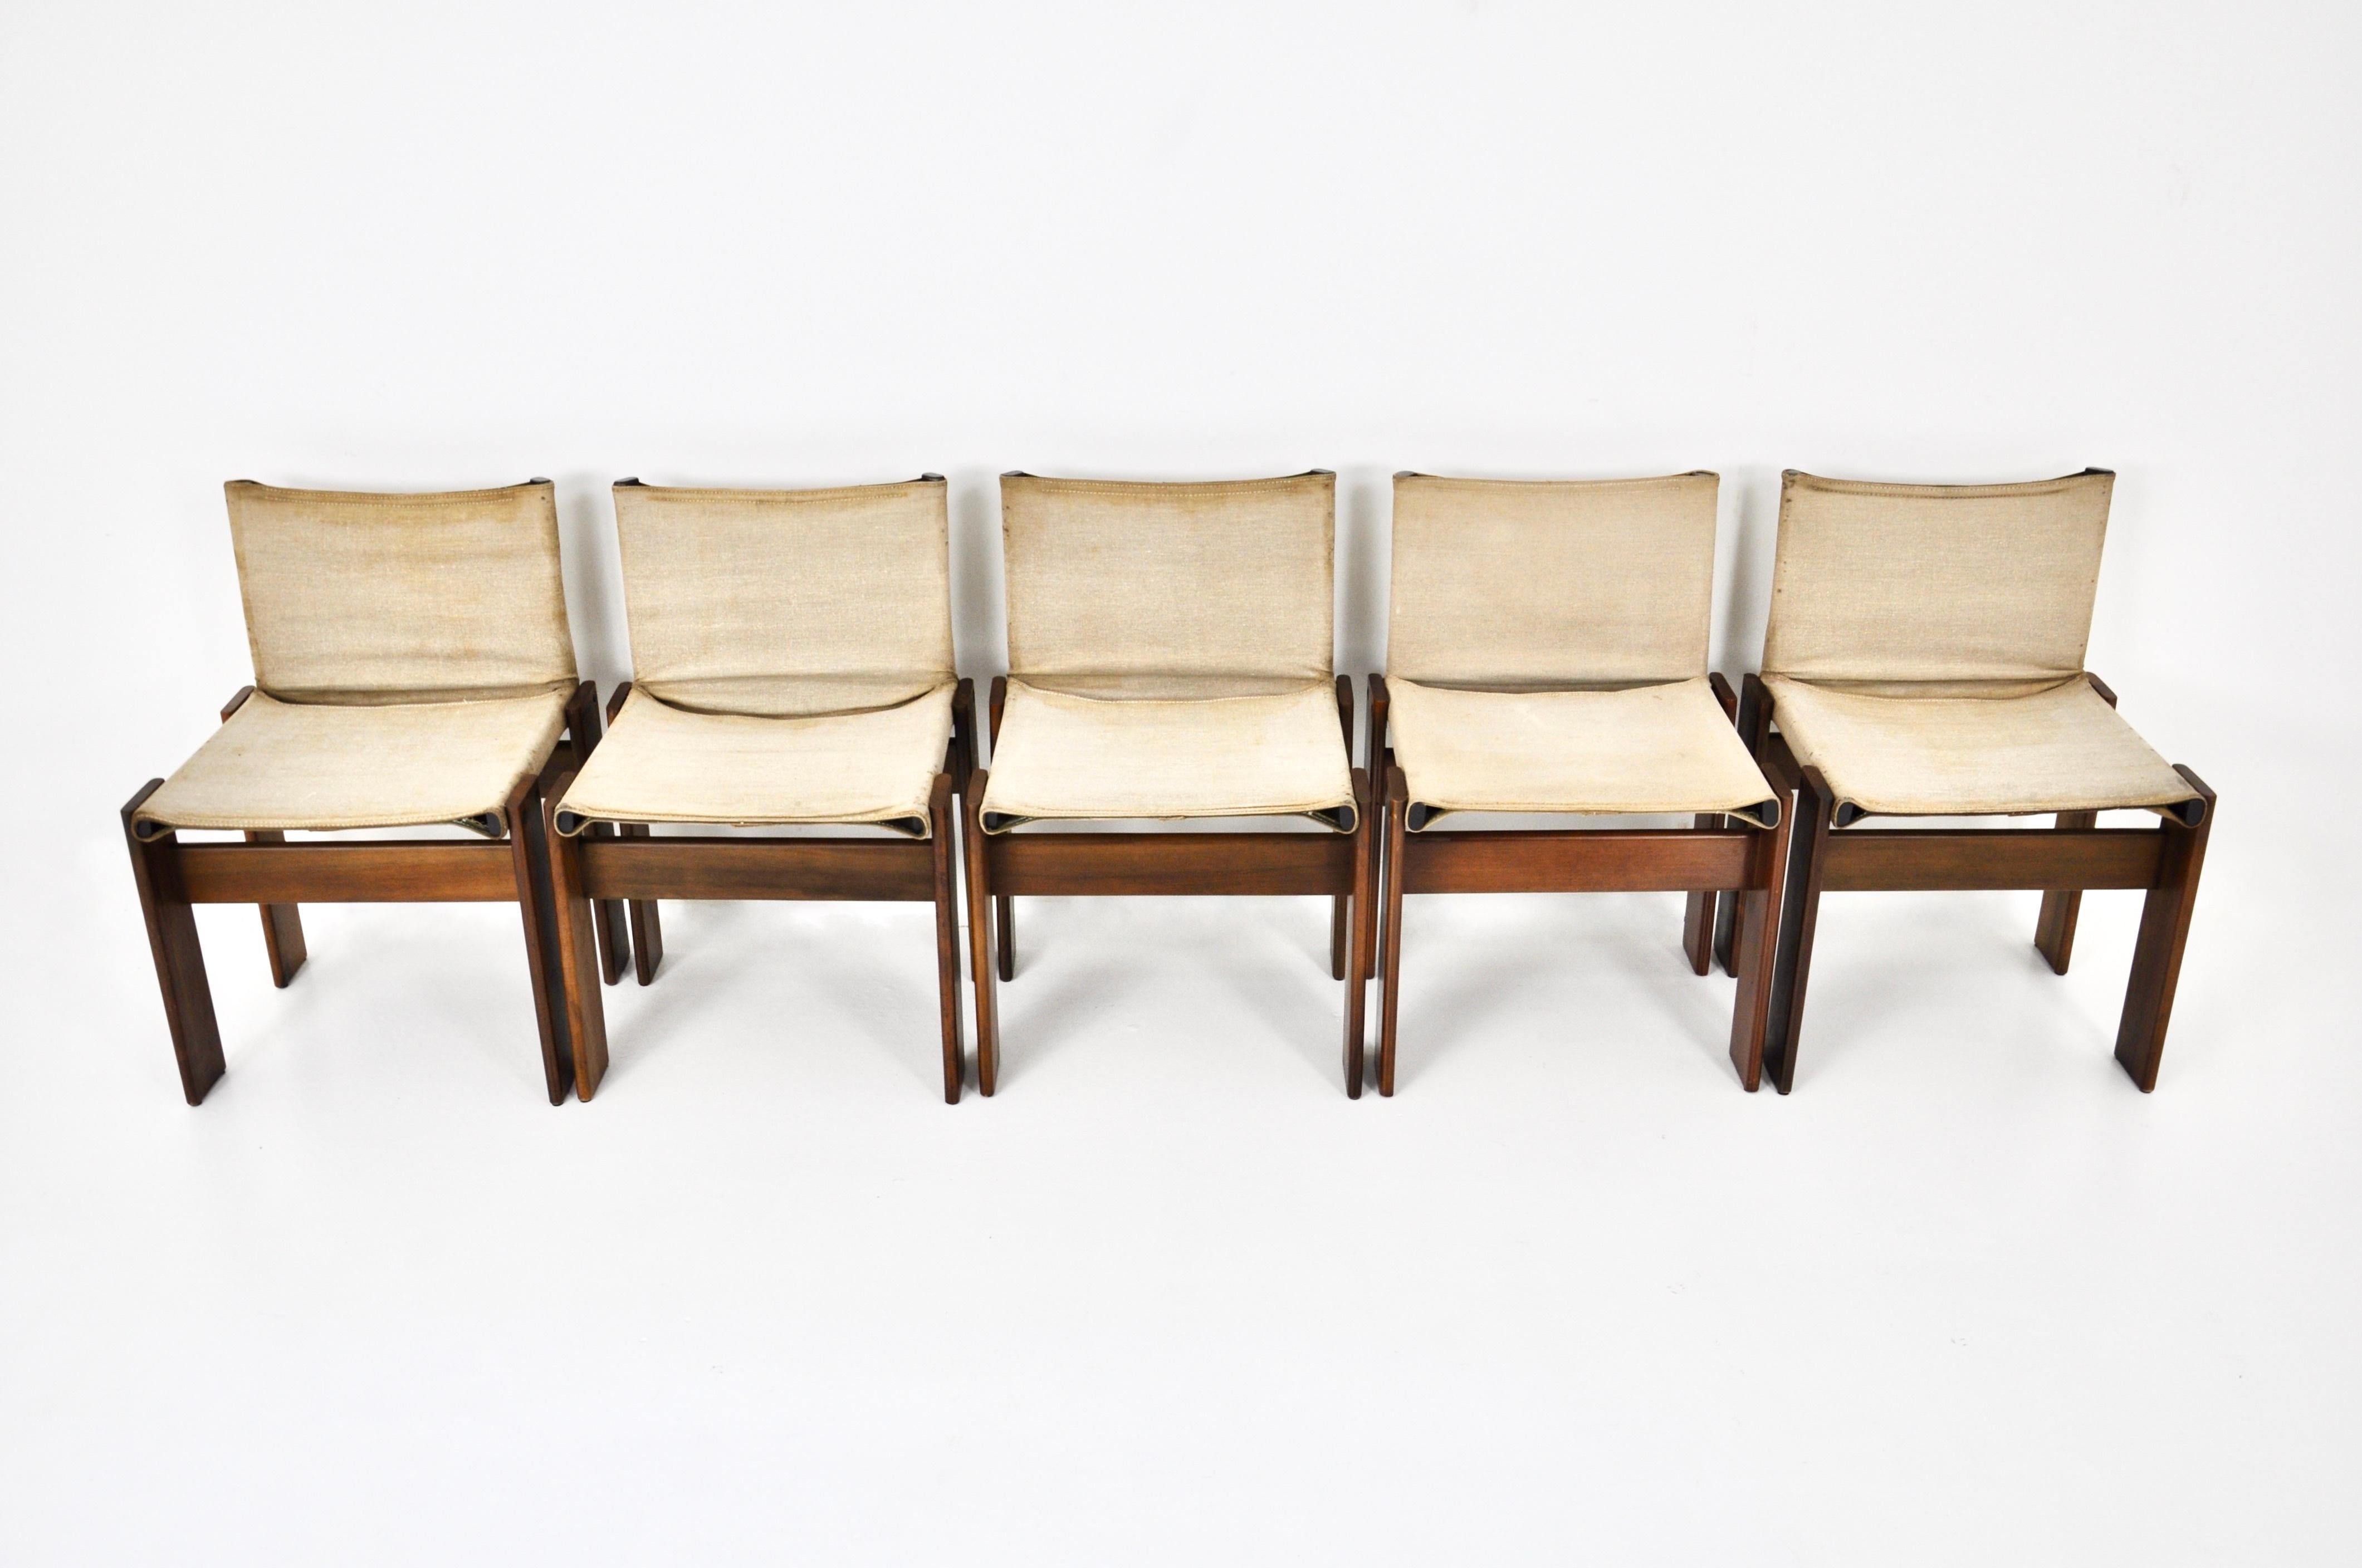 Monk Dining Chairs by Afra & Tobia Scarpa for Molteni, 1970s, set of 5 For Sale 1